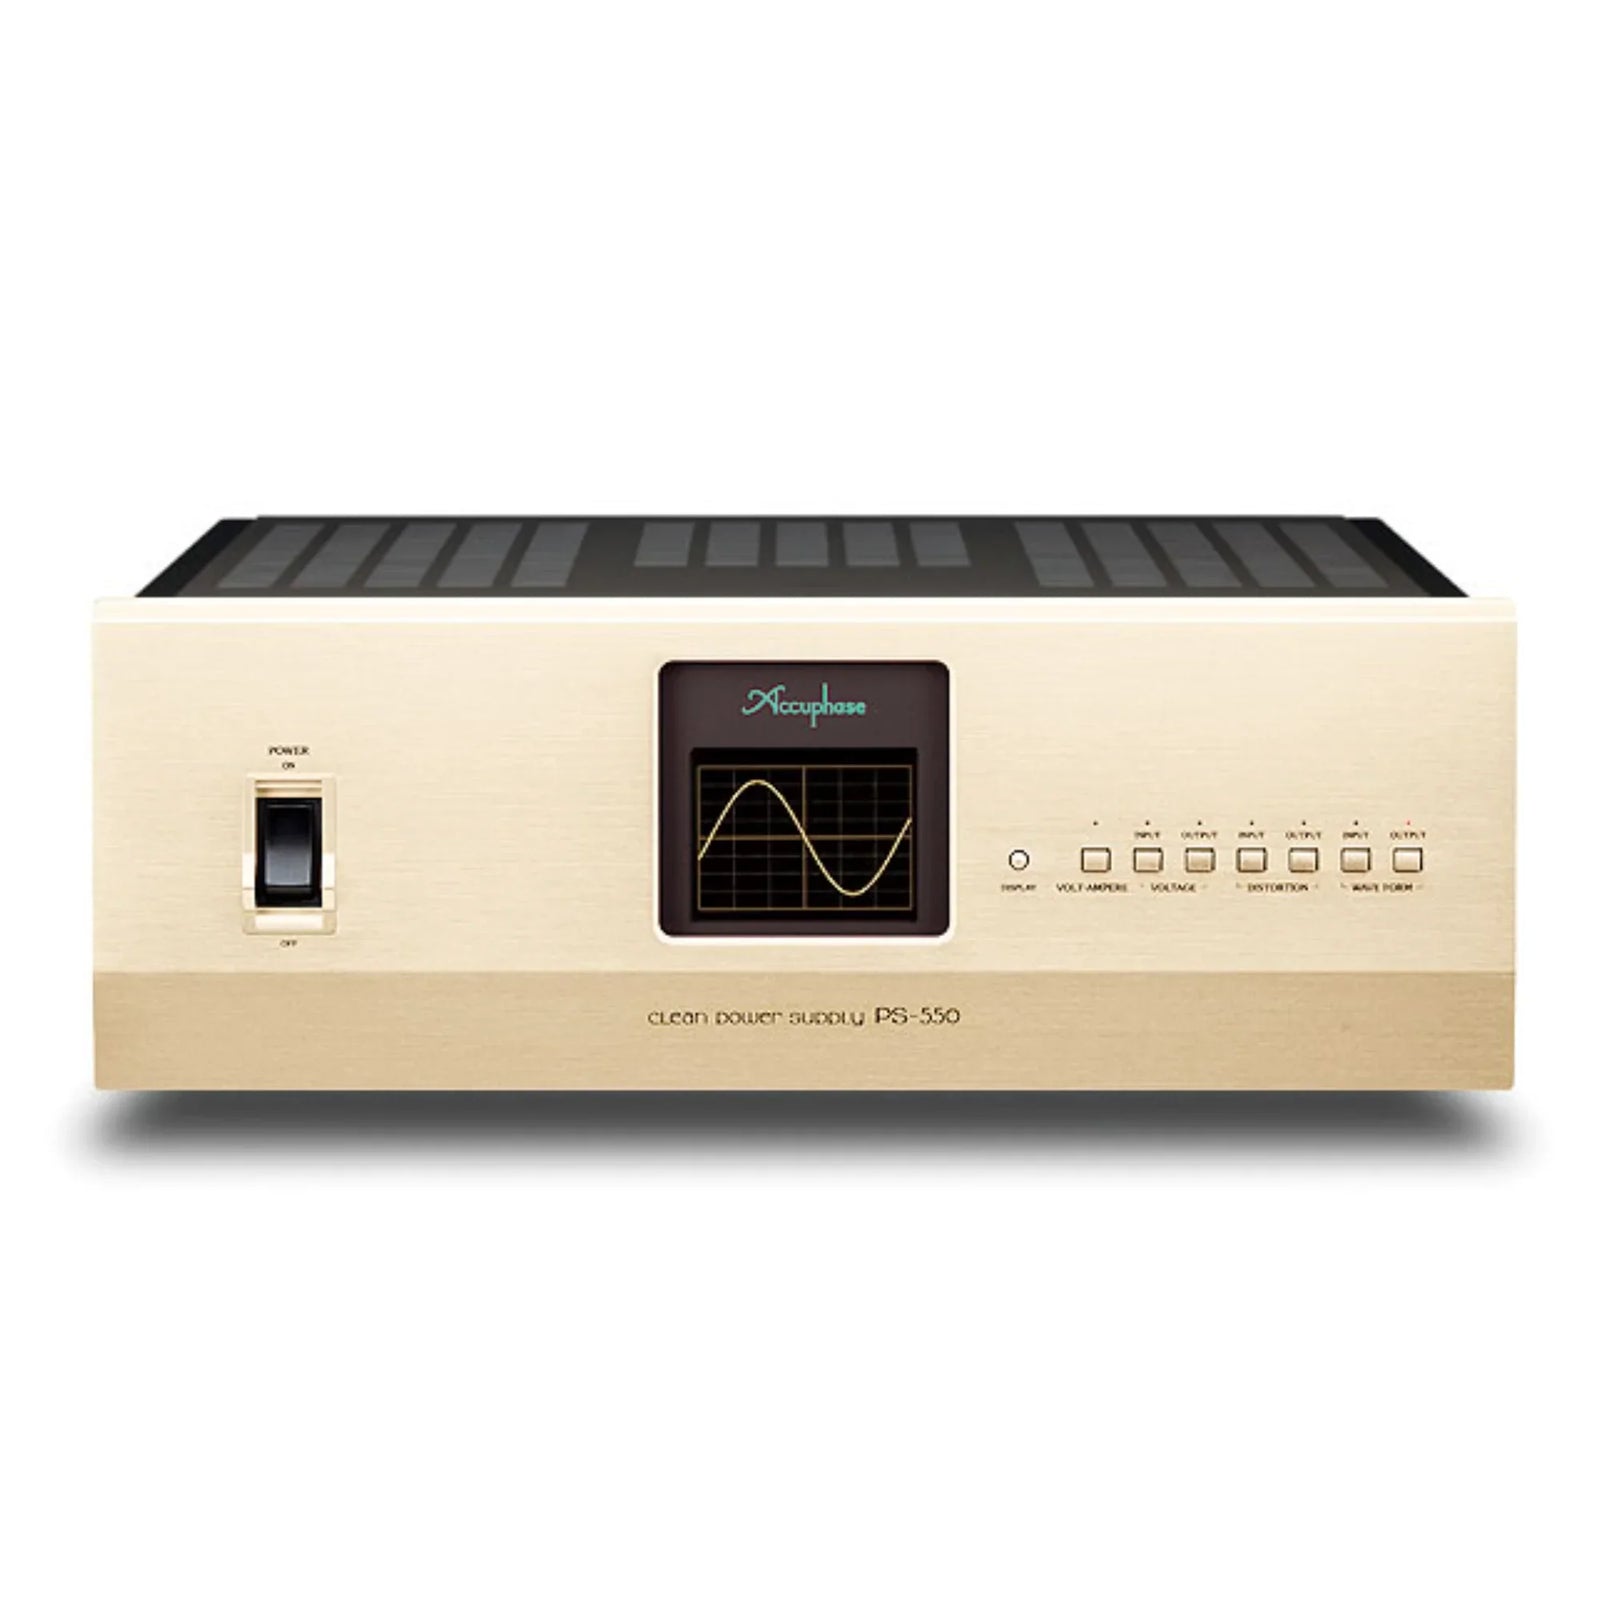 ACCUPHASE PS-550 CLEAN POWER SUPPLY 500VA | VINYL SOUND USA Accuphase PS-550 Clean Power Supply 500VA Products & Specification The power supply delivers the energy your audio equipment uses for music playback. Accuphase’s Clean Power Supply components provide a power source with minimum noise and distortion by utilizing a groundbreaking waveform shaping technology that compares the power supply